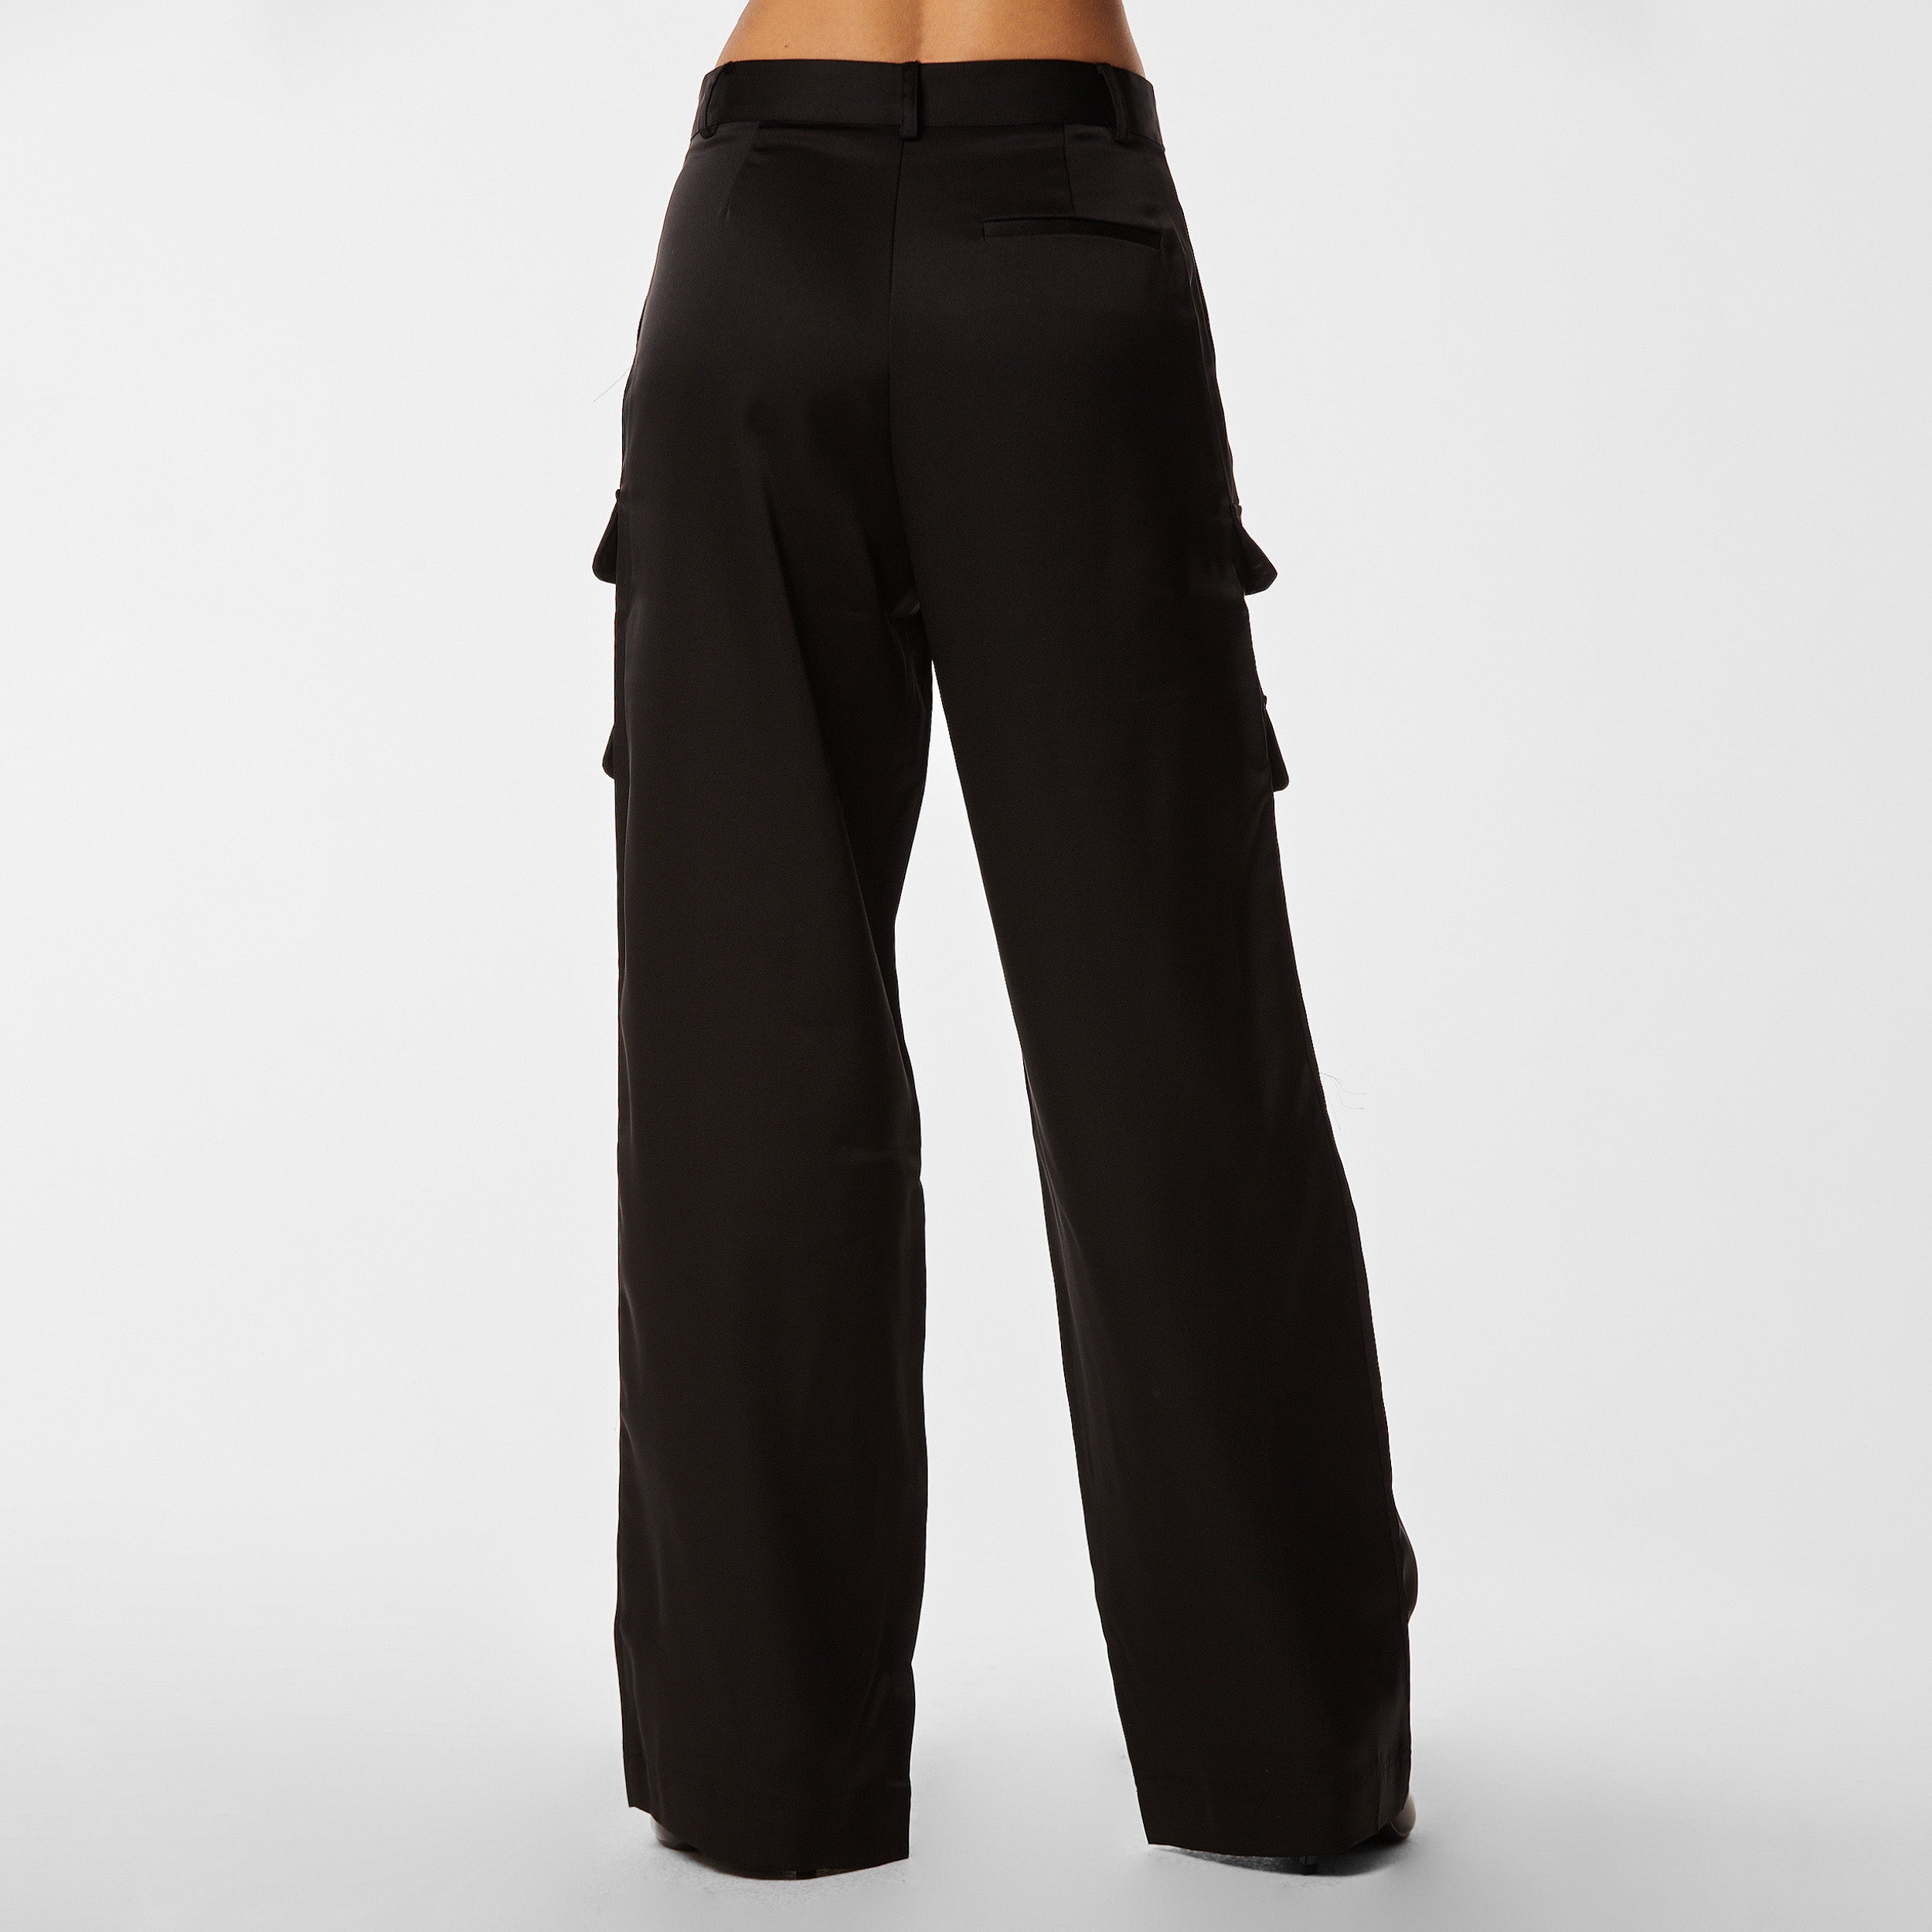 Rear view of woman wearing Black Satin Milan Pant features Mid-rise with side pockets and cargo detail. Luxurious and structured satin-like fabric. 